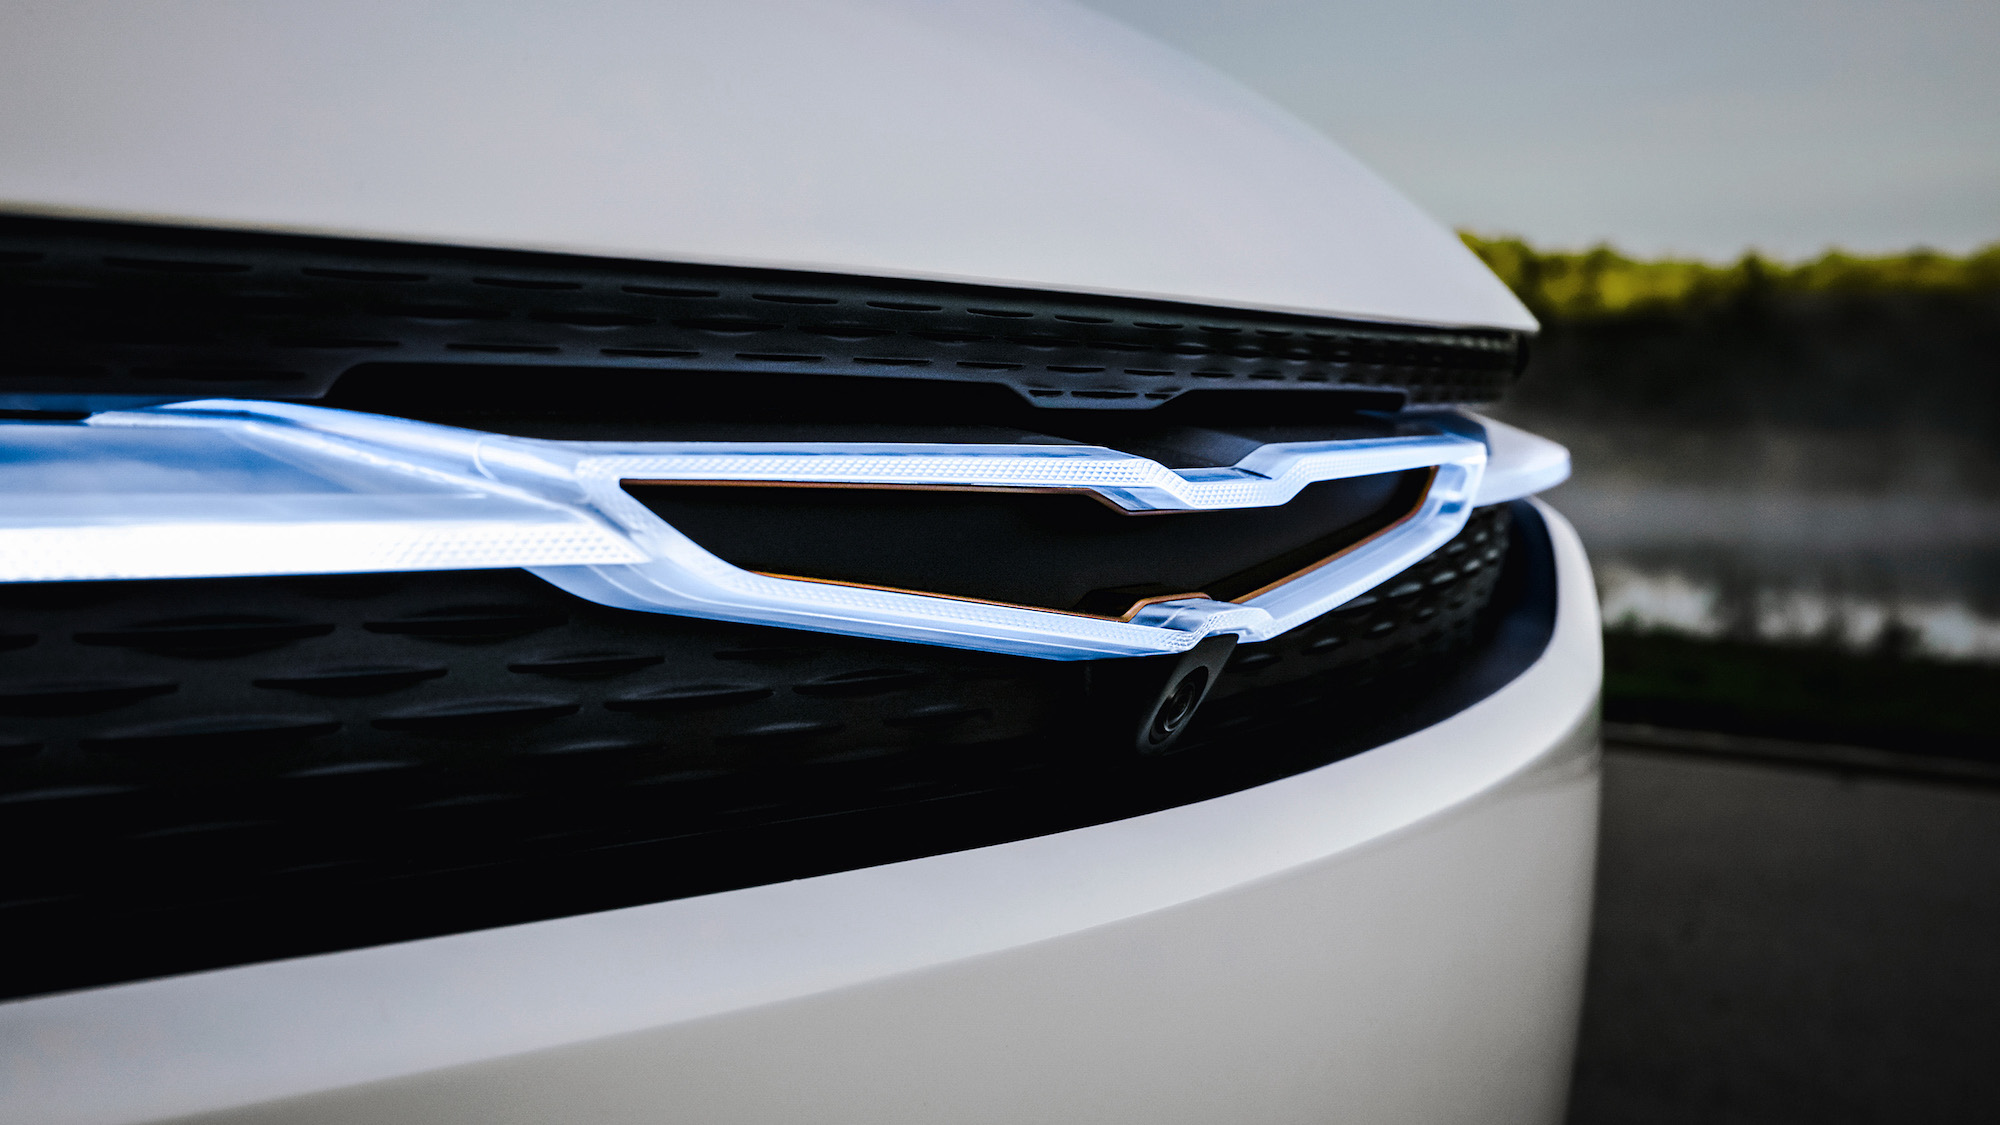 Chrysler Airflow Concept announces its electric aesthetic with the Chrysler Wing logo linked to a luminous cross grille / blade illuminated by crystal LED lighting.